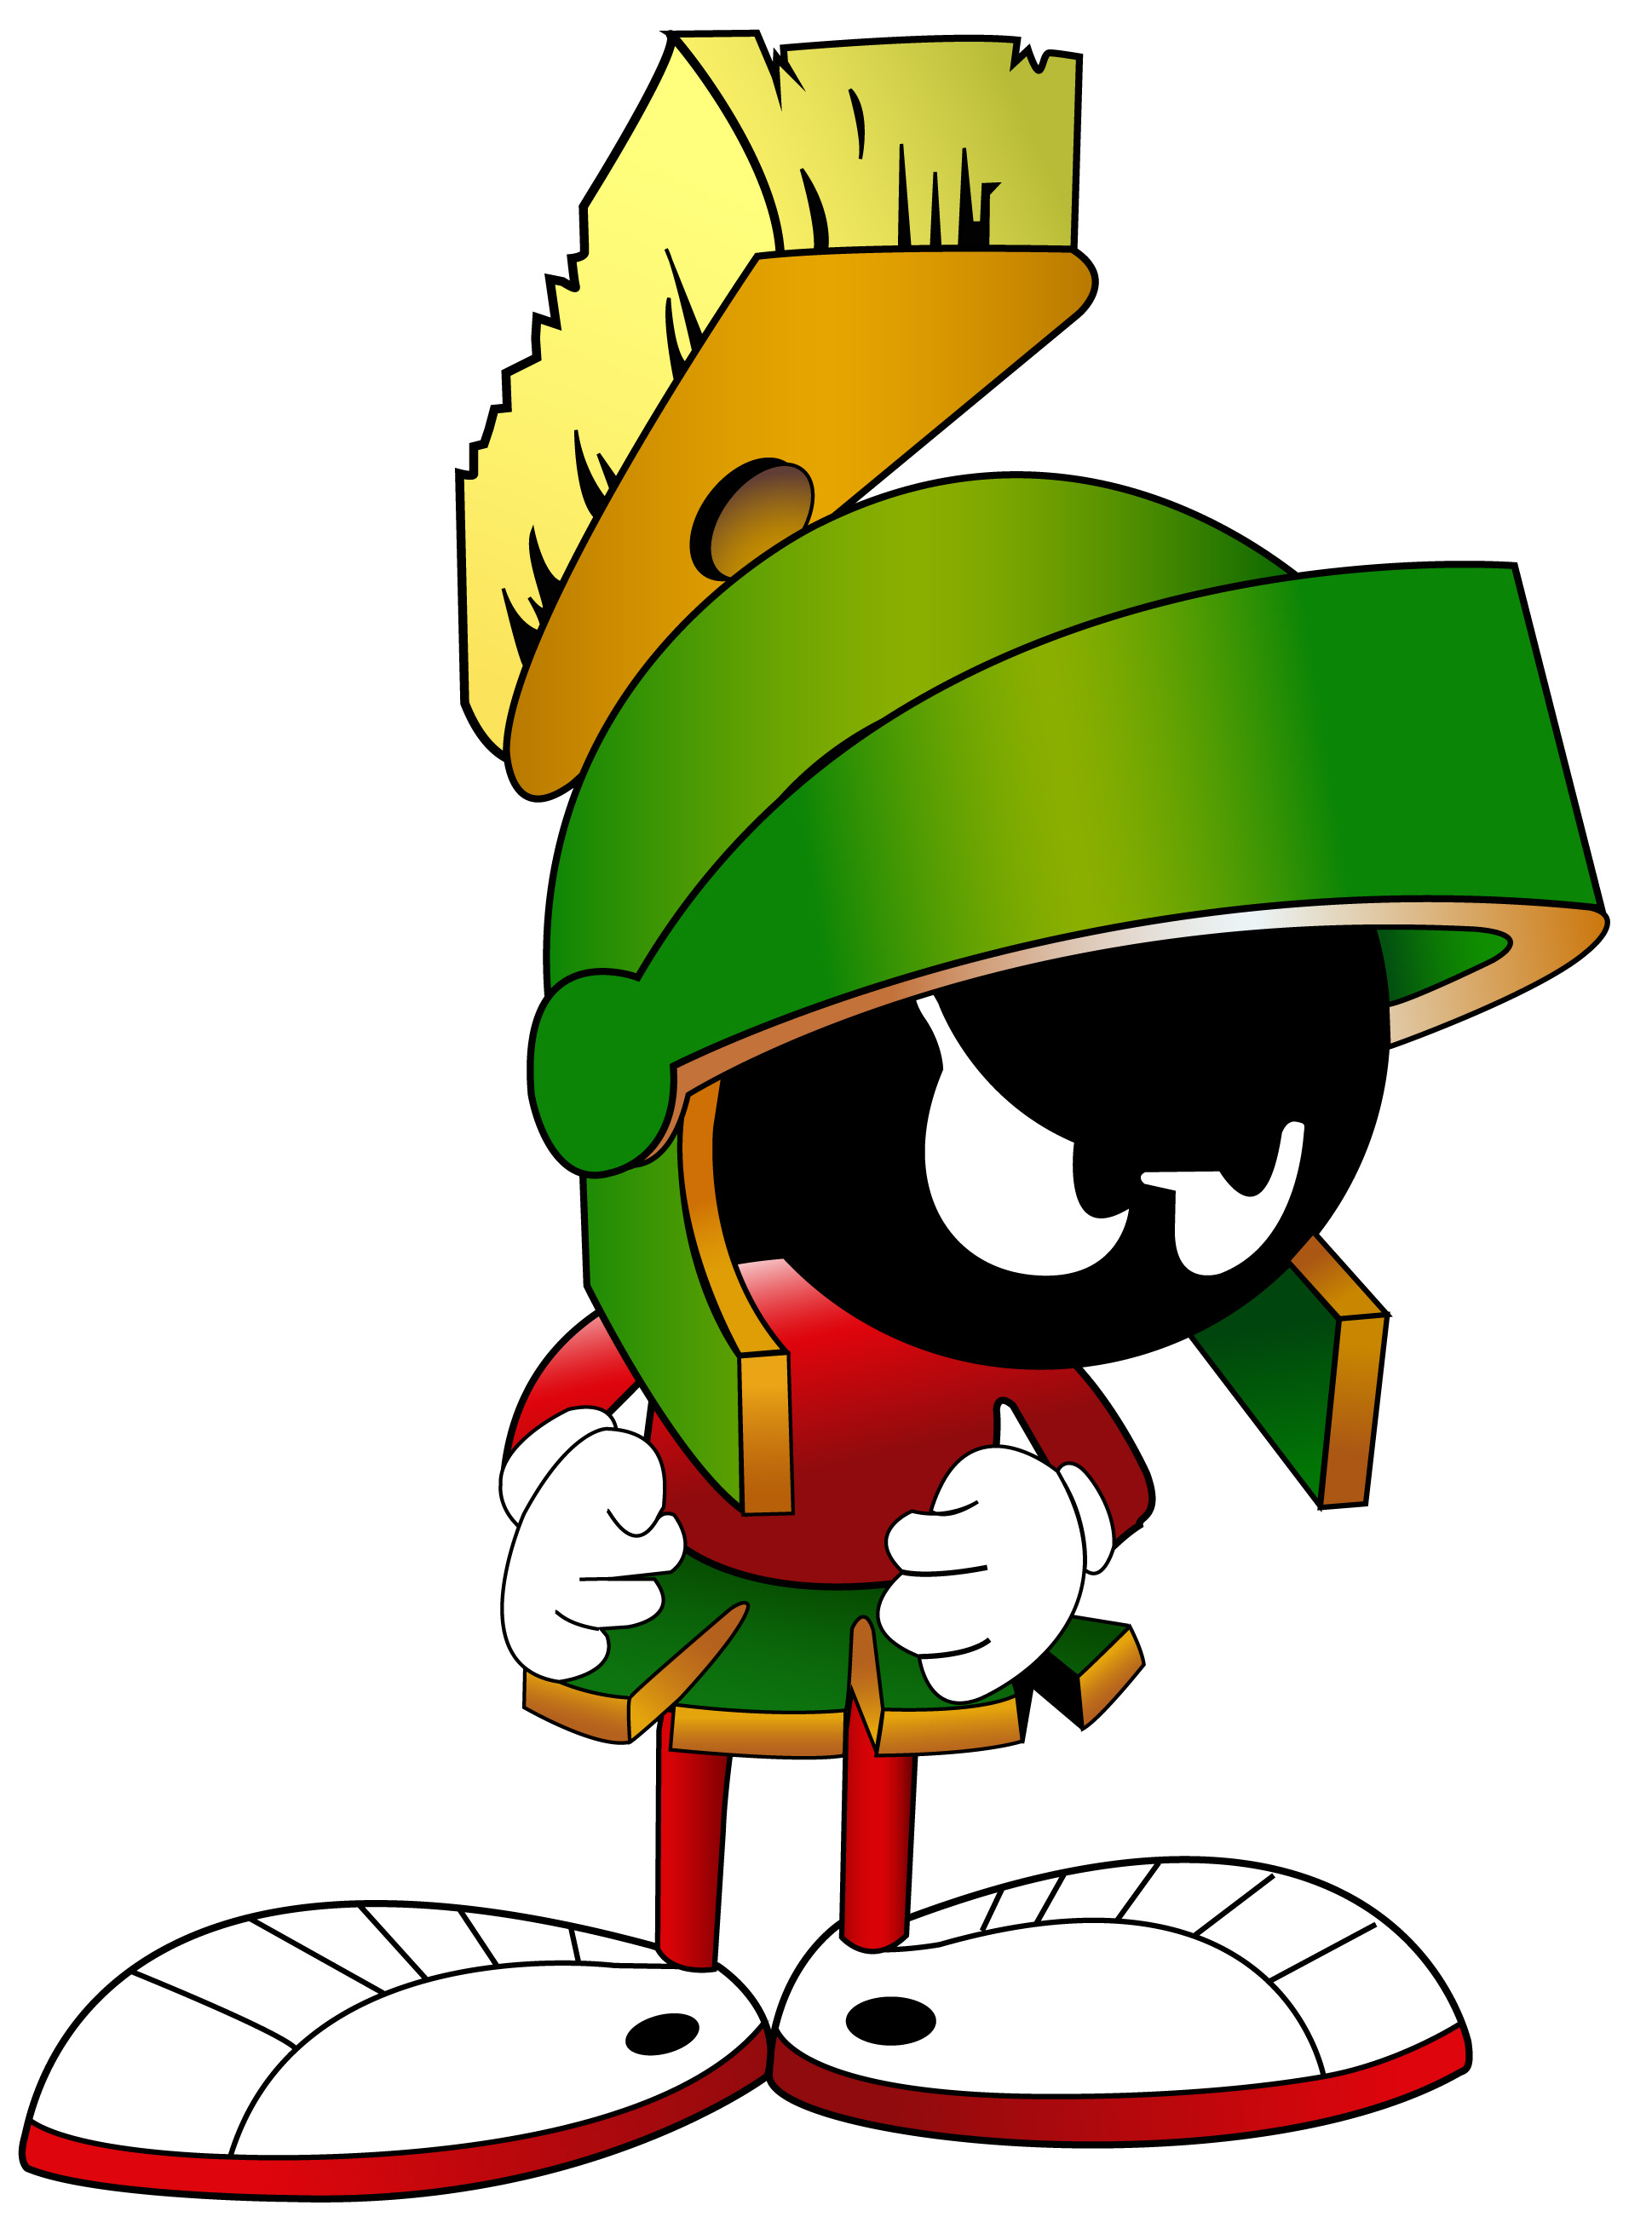 Marvin_the_Martian